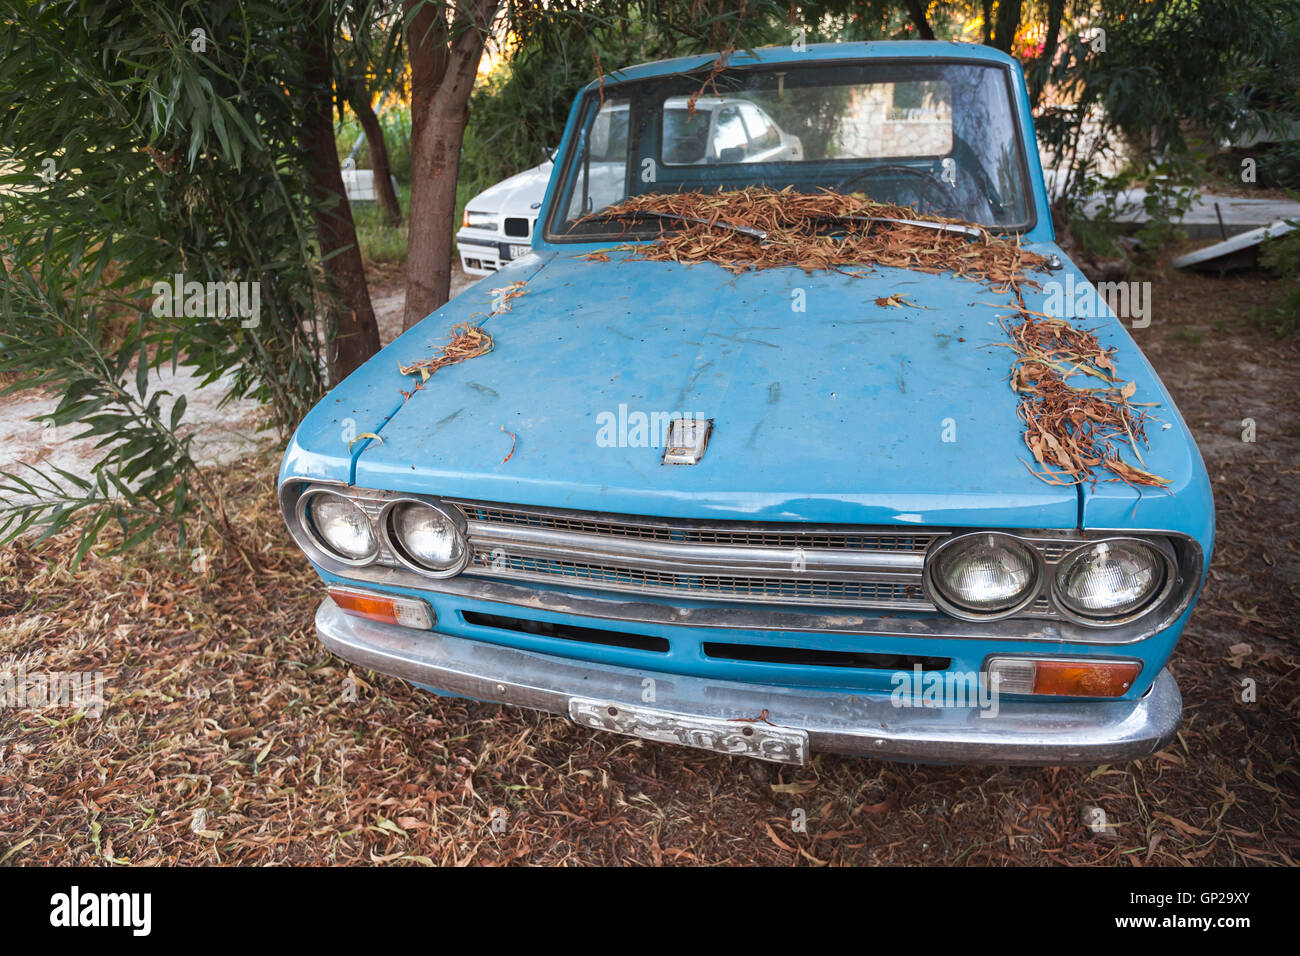 Zakynthos, Greece - August 16, 2016: closeup front view of old blue Datsun 1300 pickup car Stock Photo